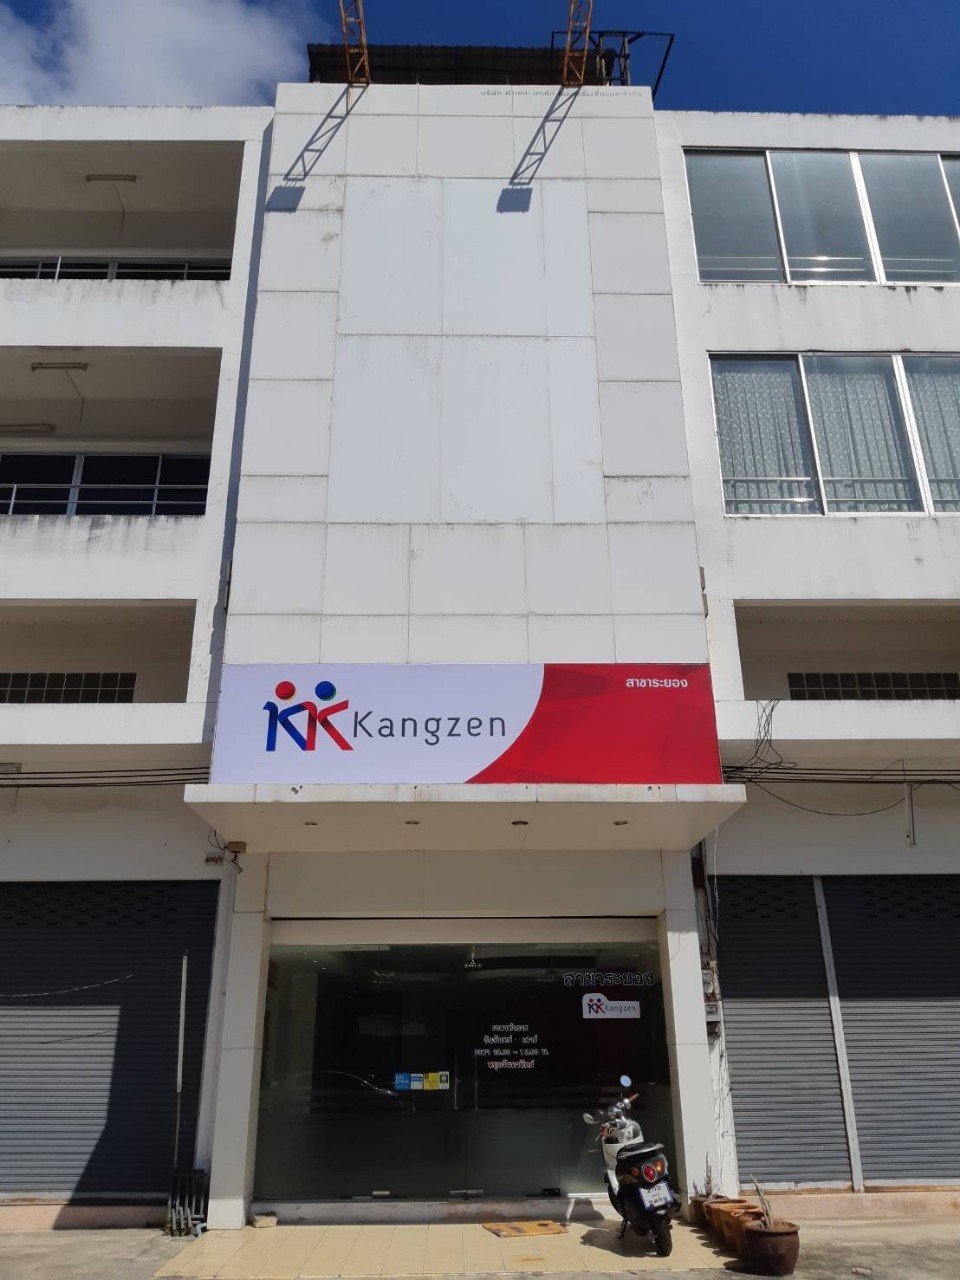 4-Storey Shop House for rent Rayong 35 Sq.Wah